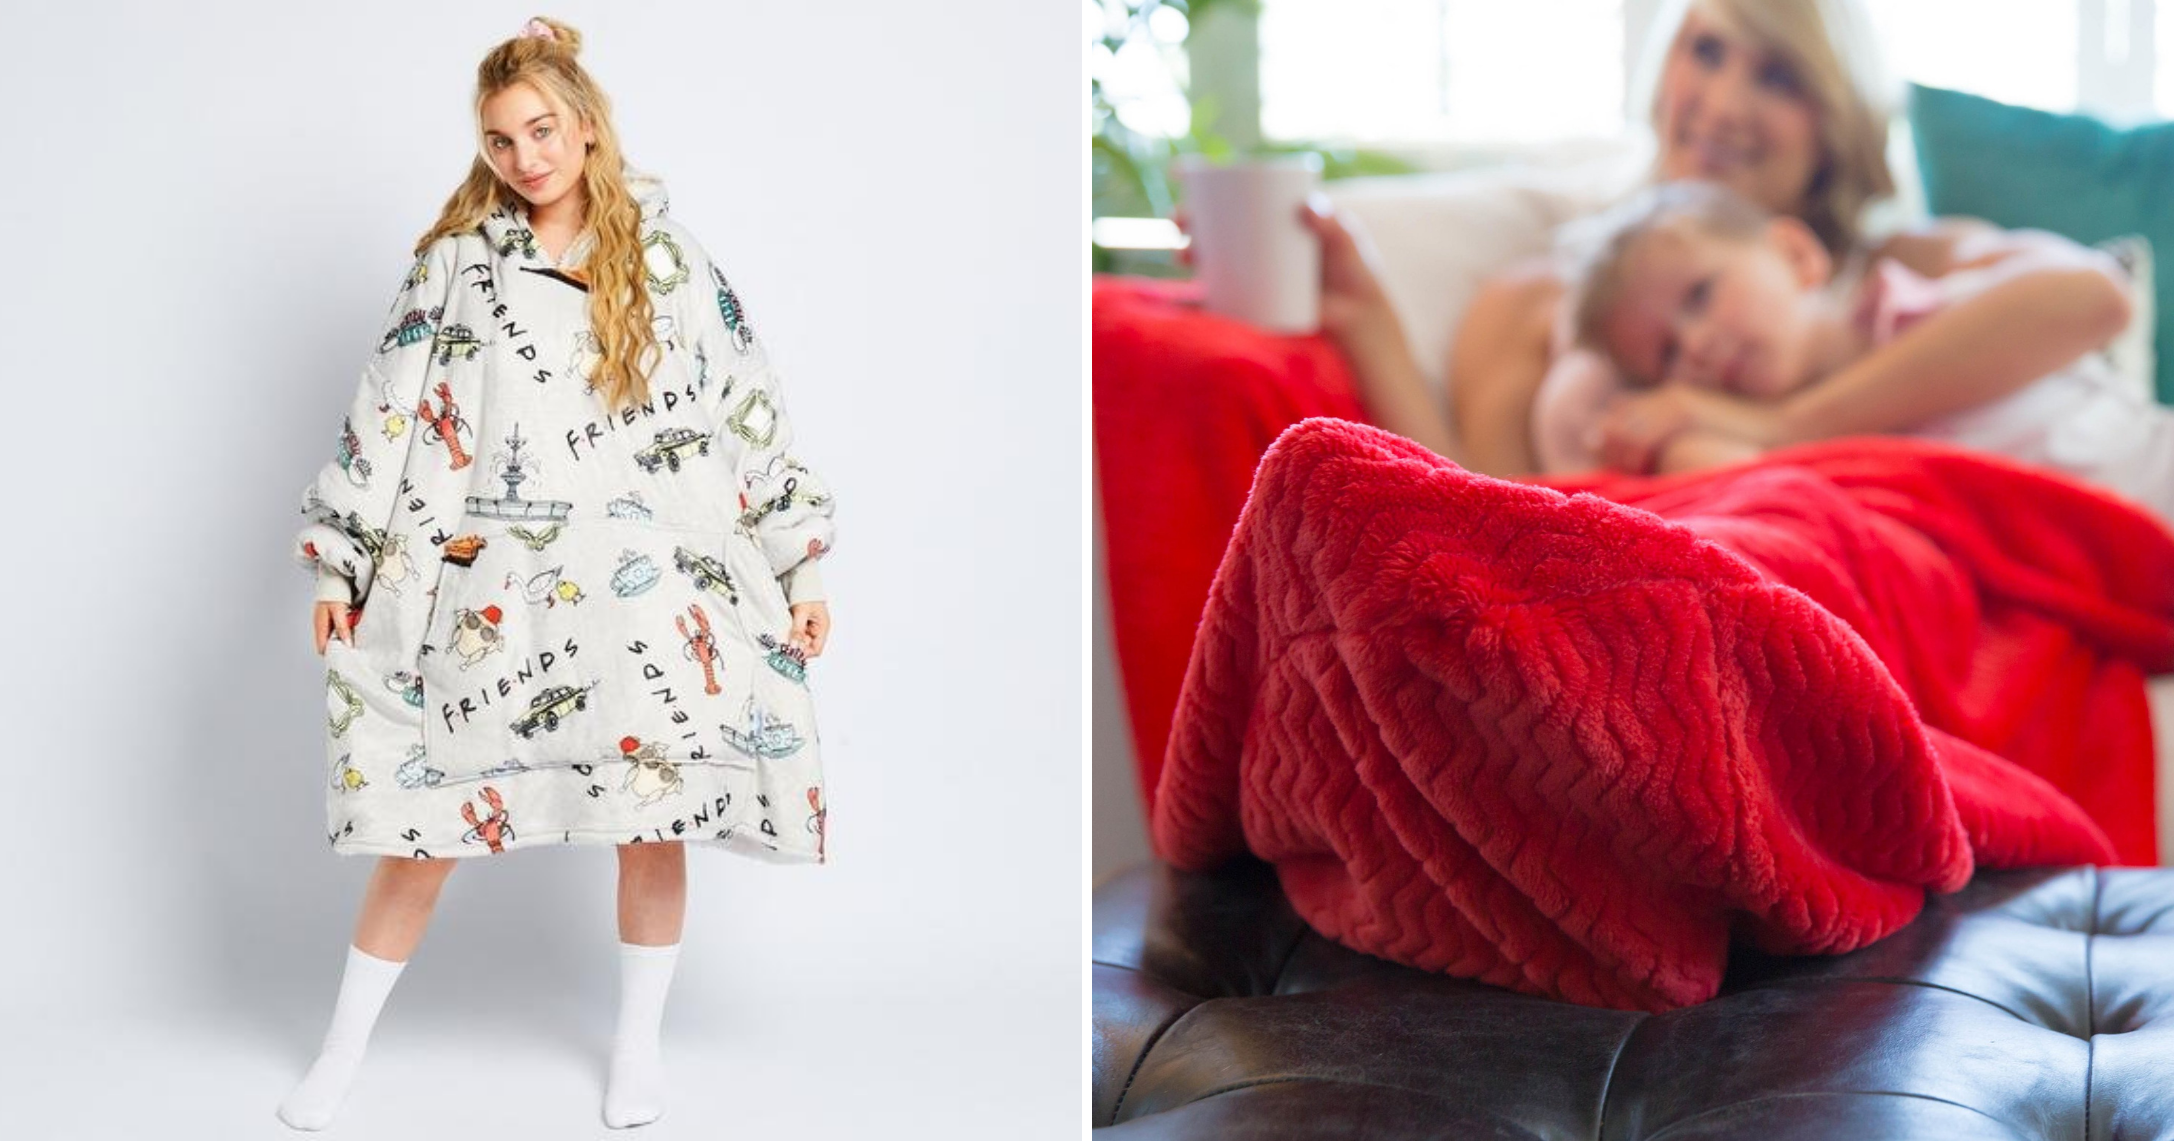 Cozy Gift Box | Comfy Gifts for Moms — NURTURED 9